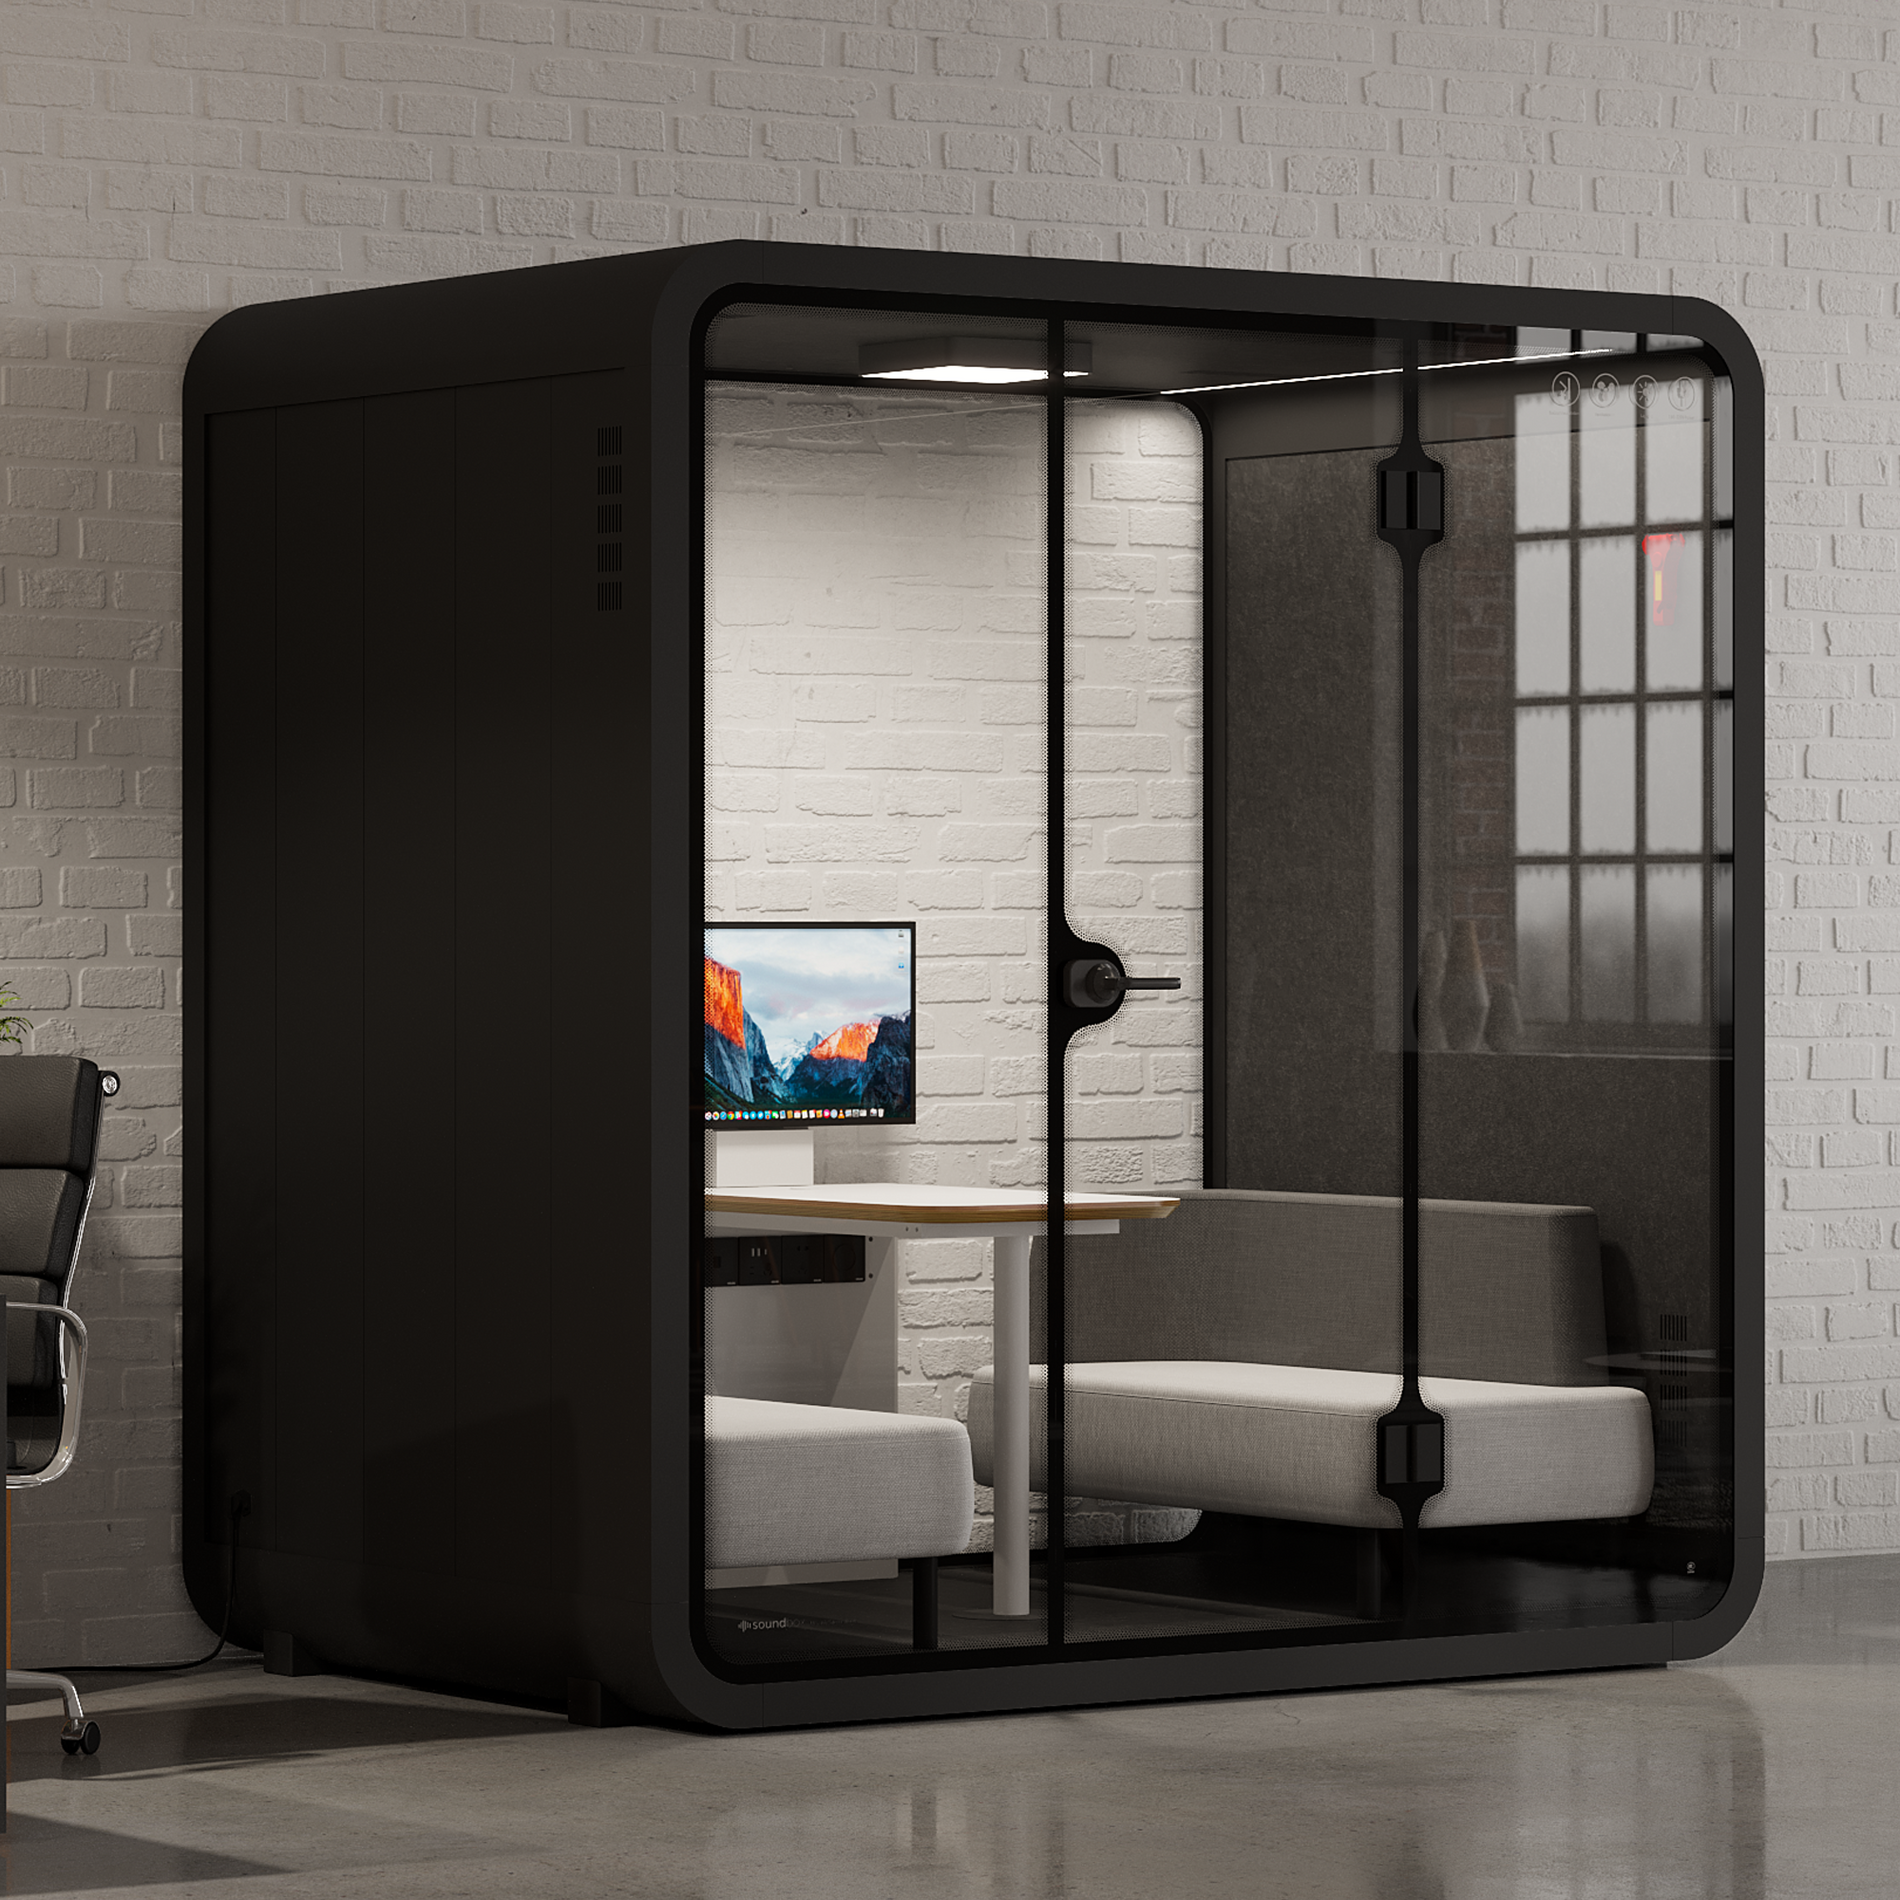 Quell - Meeting Booth - 4 PersonCharcoal / Dark Grey / No Furniture